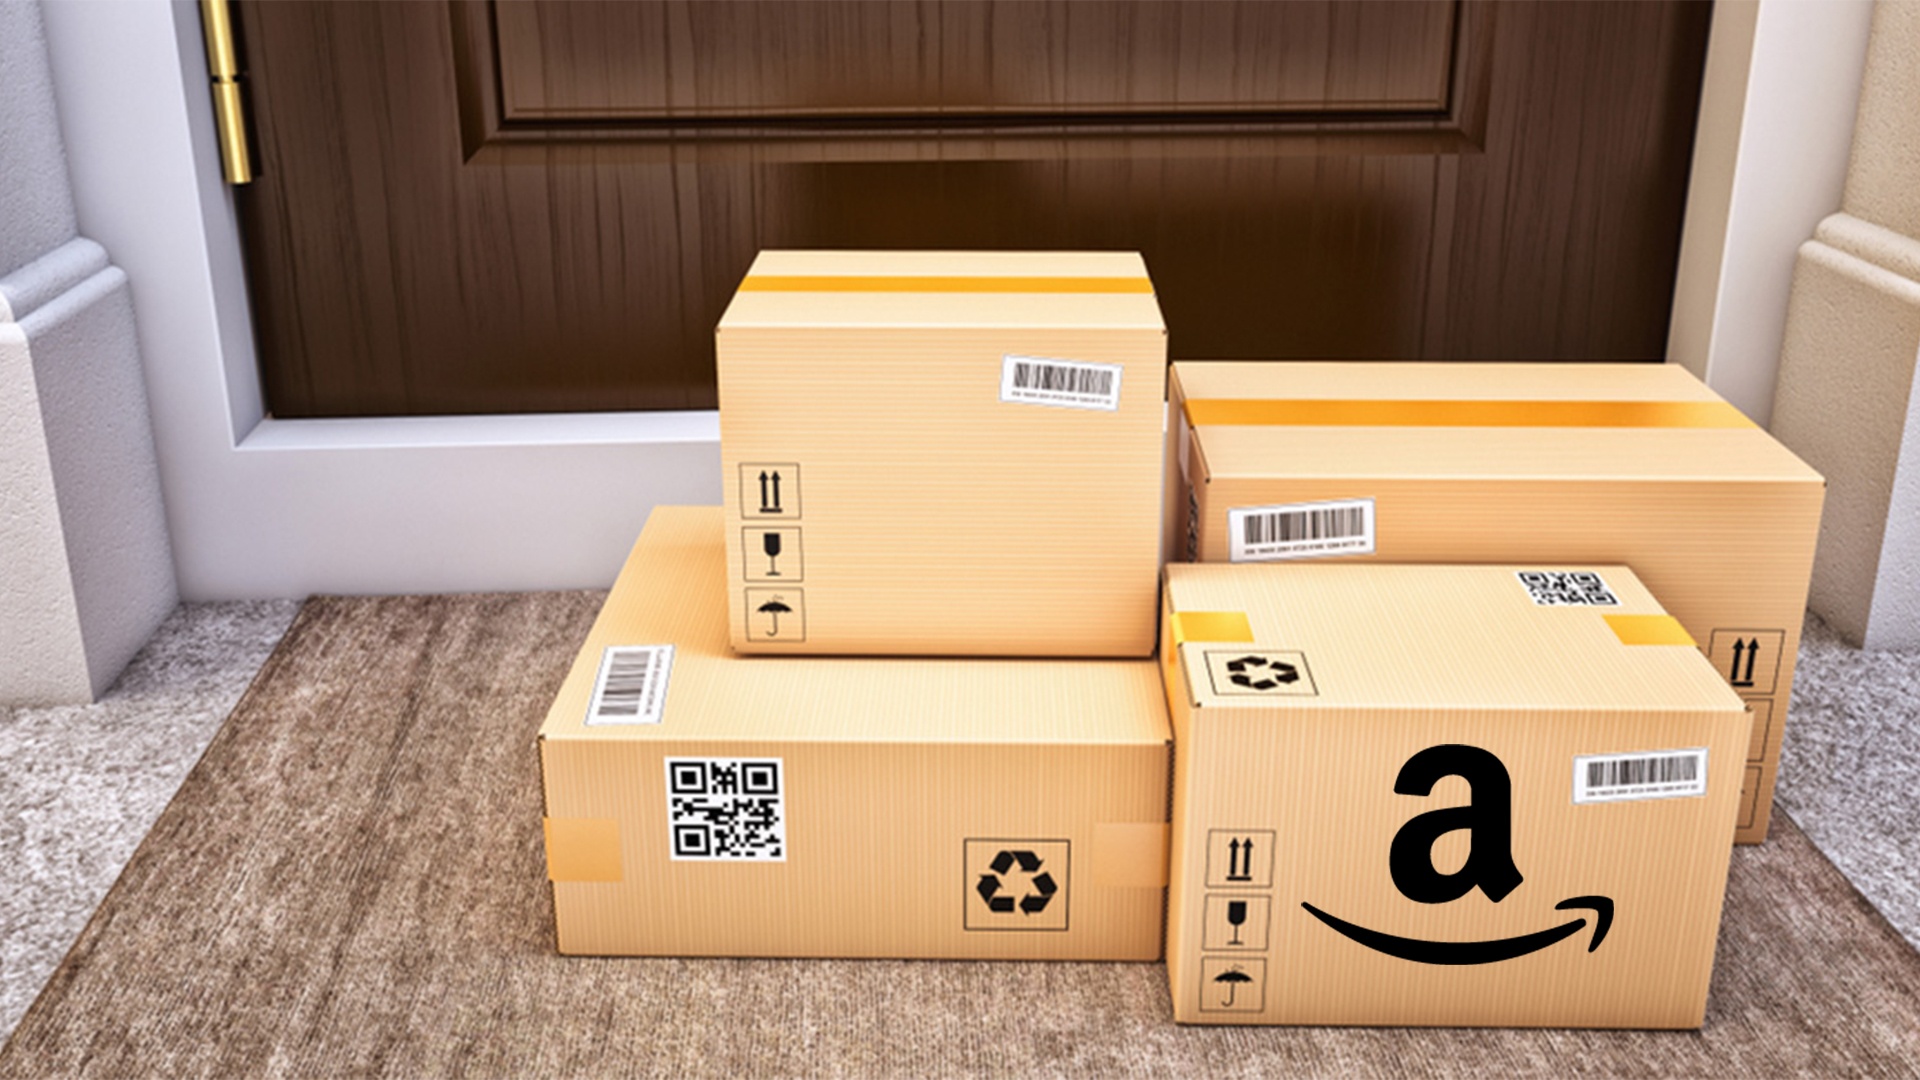 Test Buys on Amazon for Brand Managers and Brand Protection on Amazon